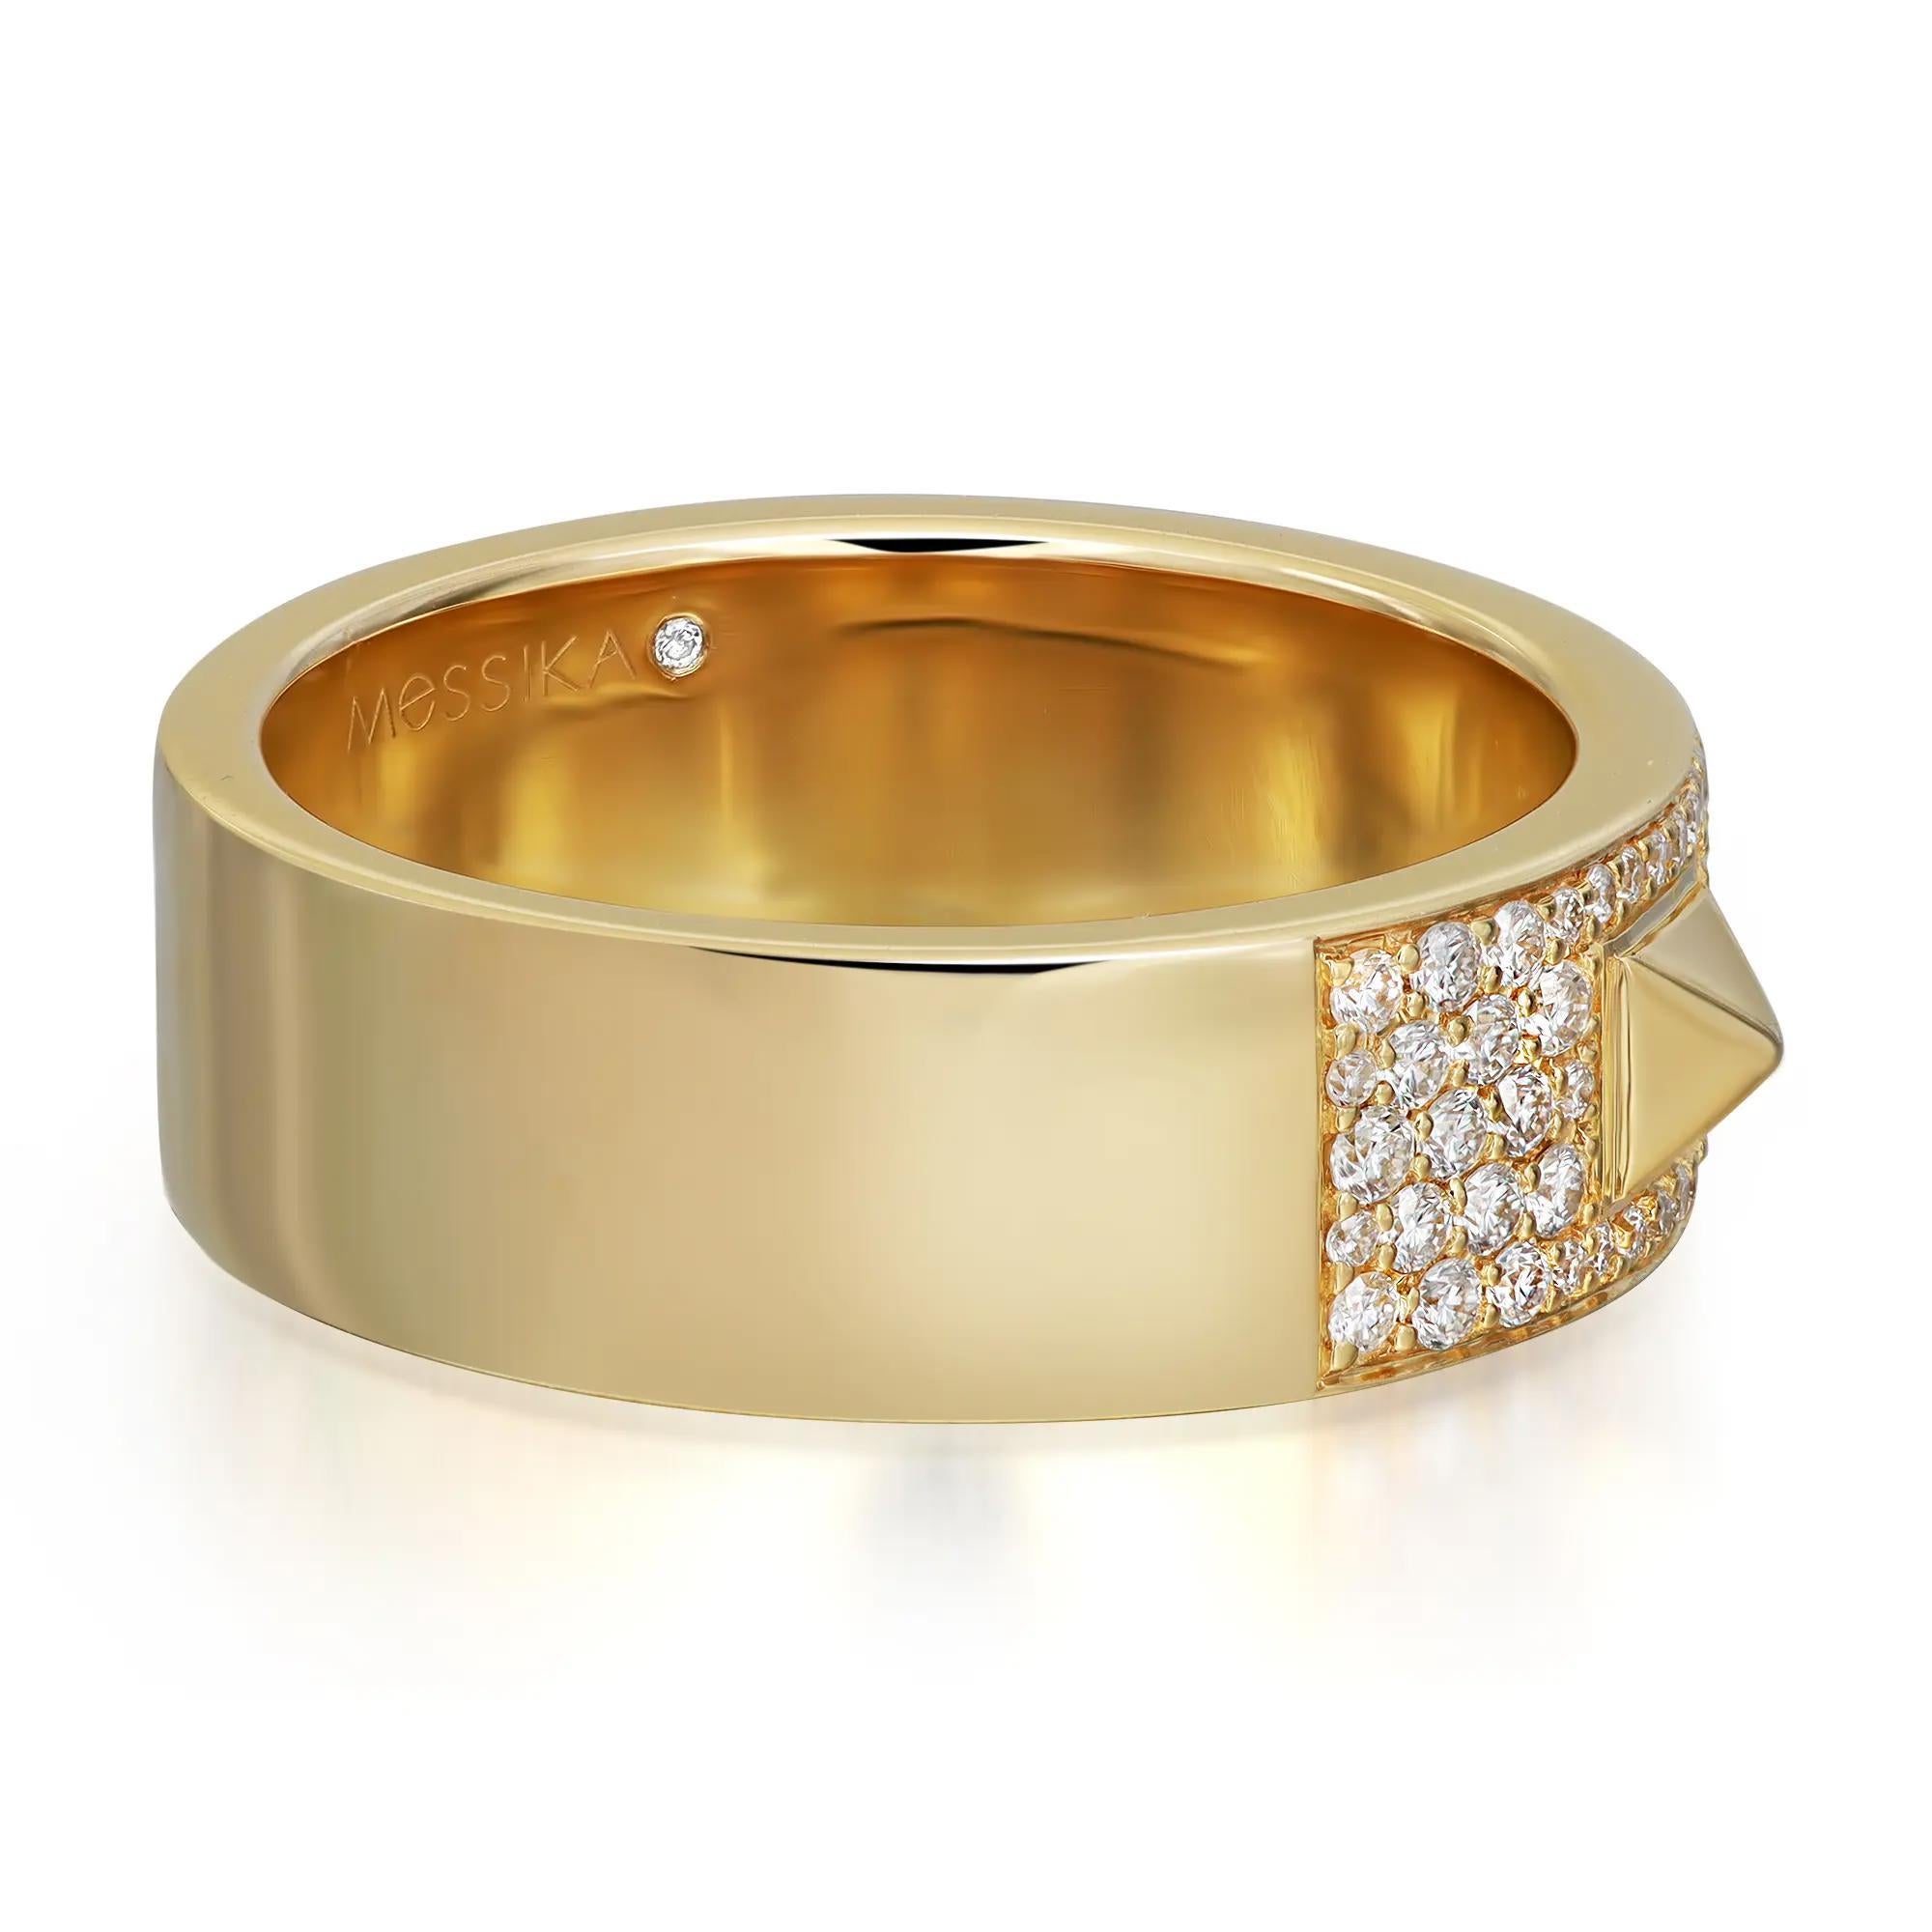 Bold and contemporary, Messika Spiky diamond band ring. Crafted in lustrous 18K yellow gold. It features pave set round brilliant cut diamonds studded halfway through the band with three spikes giving it a unique look. Total diamond weight: 0.61